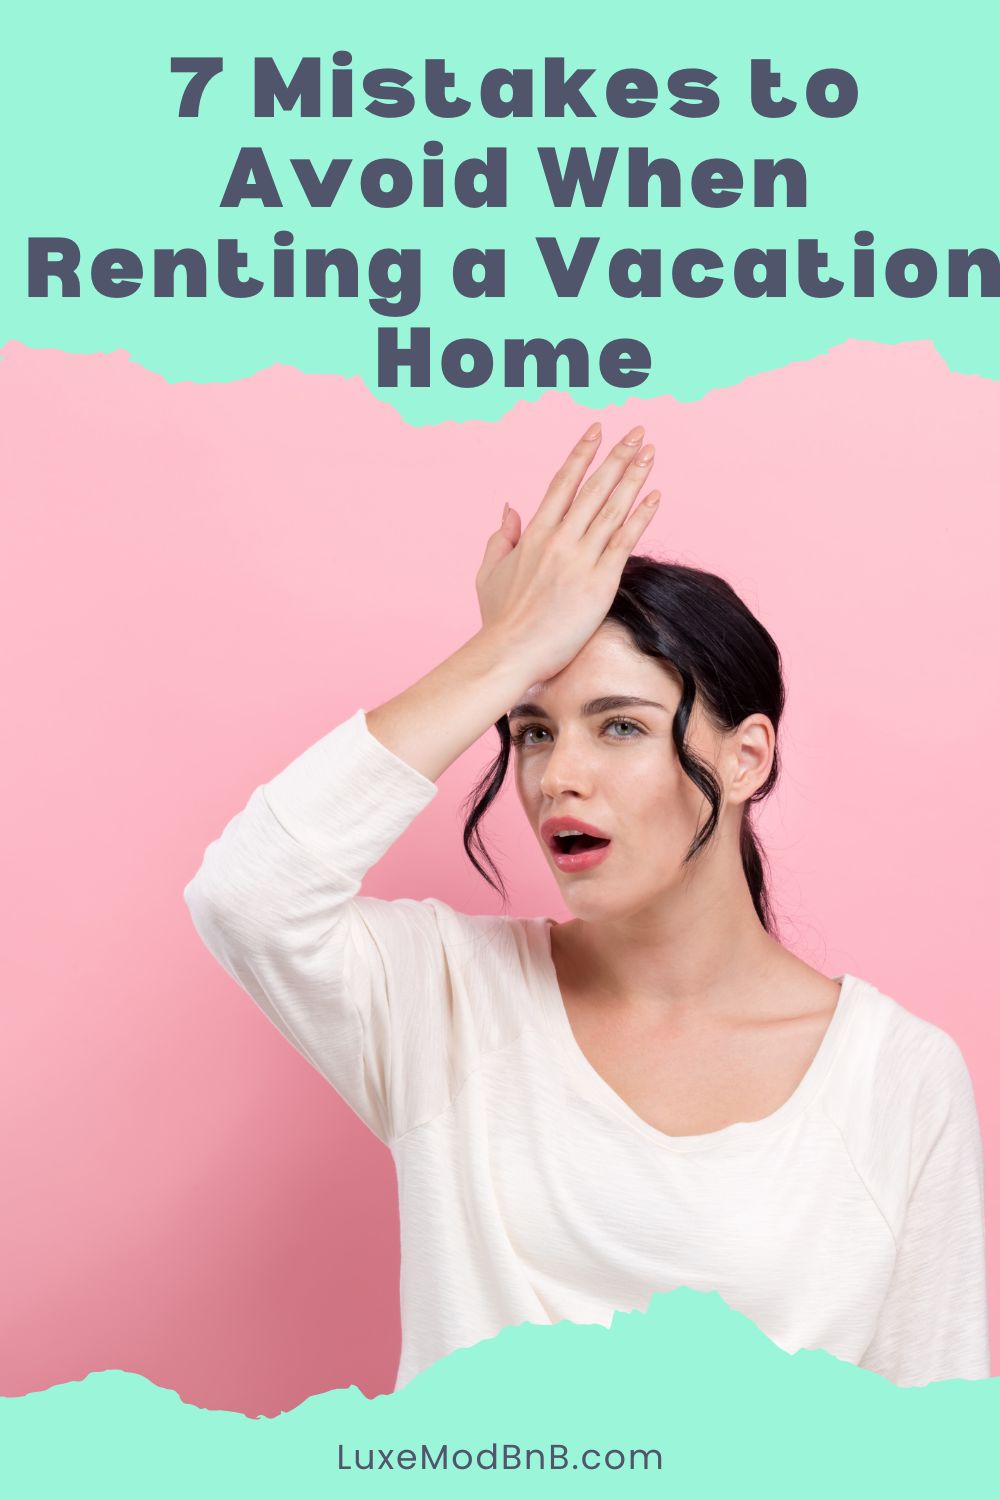 7 Mistakes to Avoid When Renting a Vacation Home